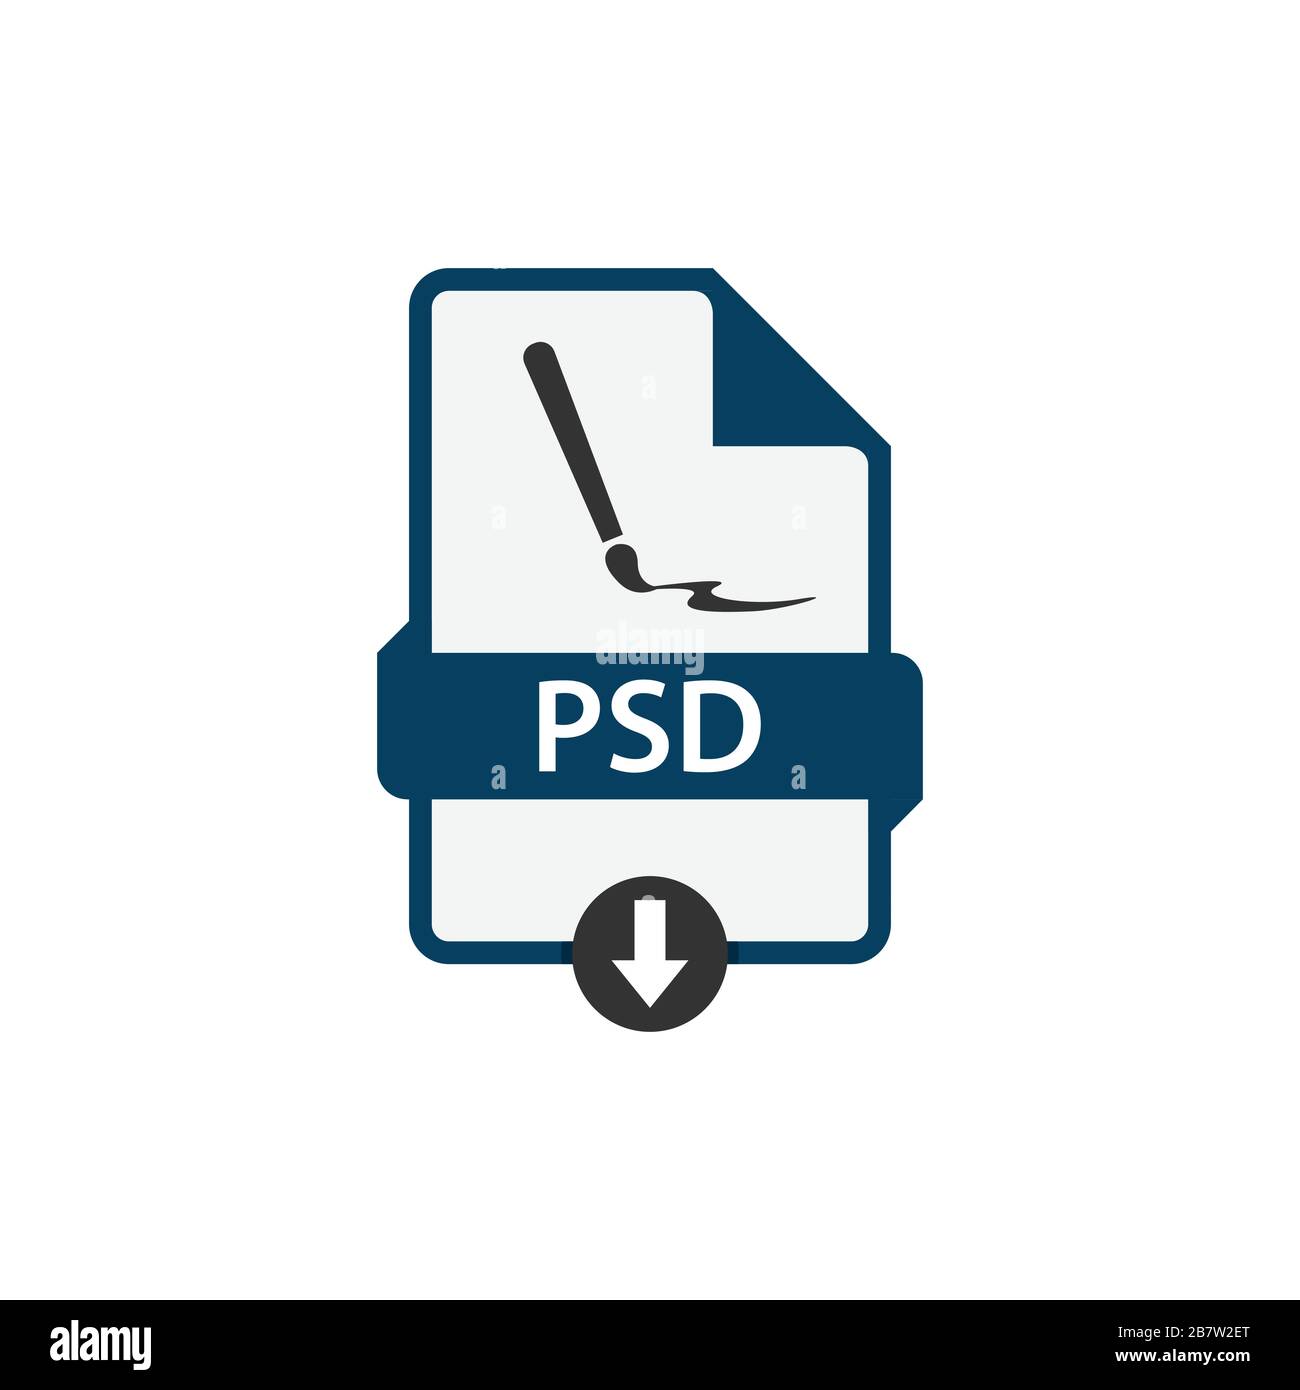 PSD download file format vector image. PSD file icon flat design graphic vector Stock Vector